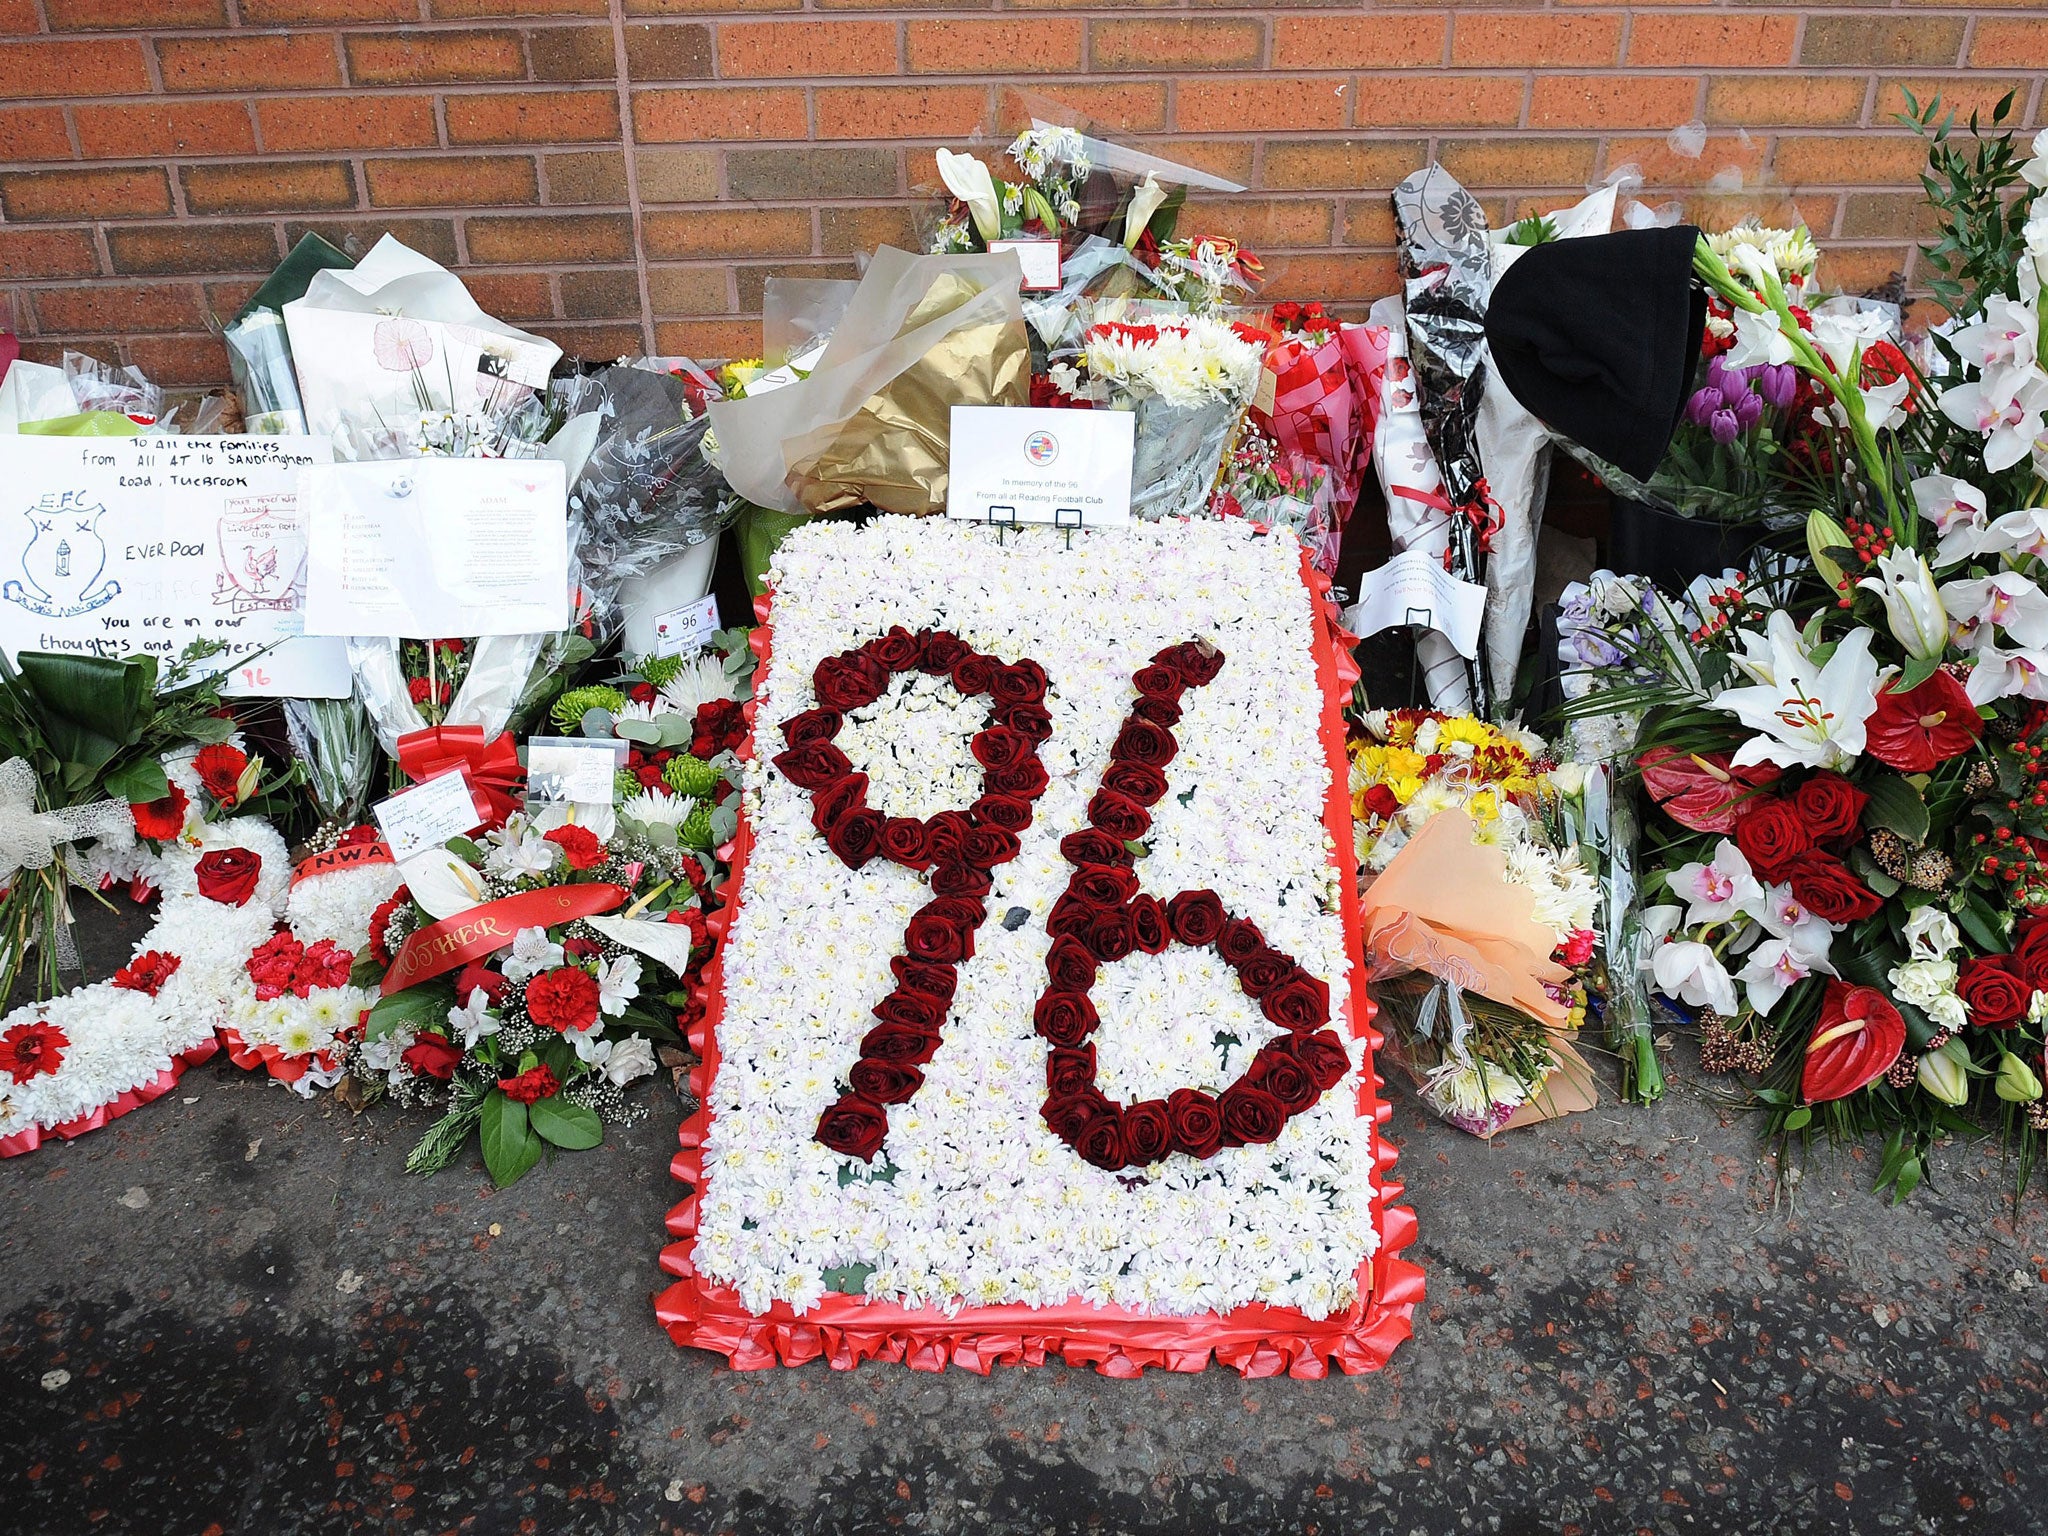 Flowers and a message left by Reading Football Club at the memorial outside Anfield for the 96 fans who died in the Hillsborough Stadium disaster